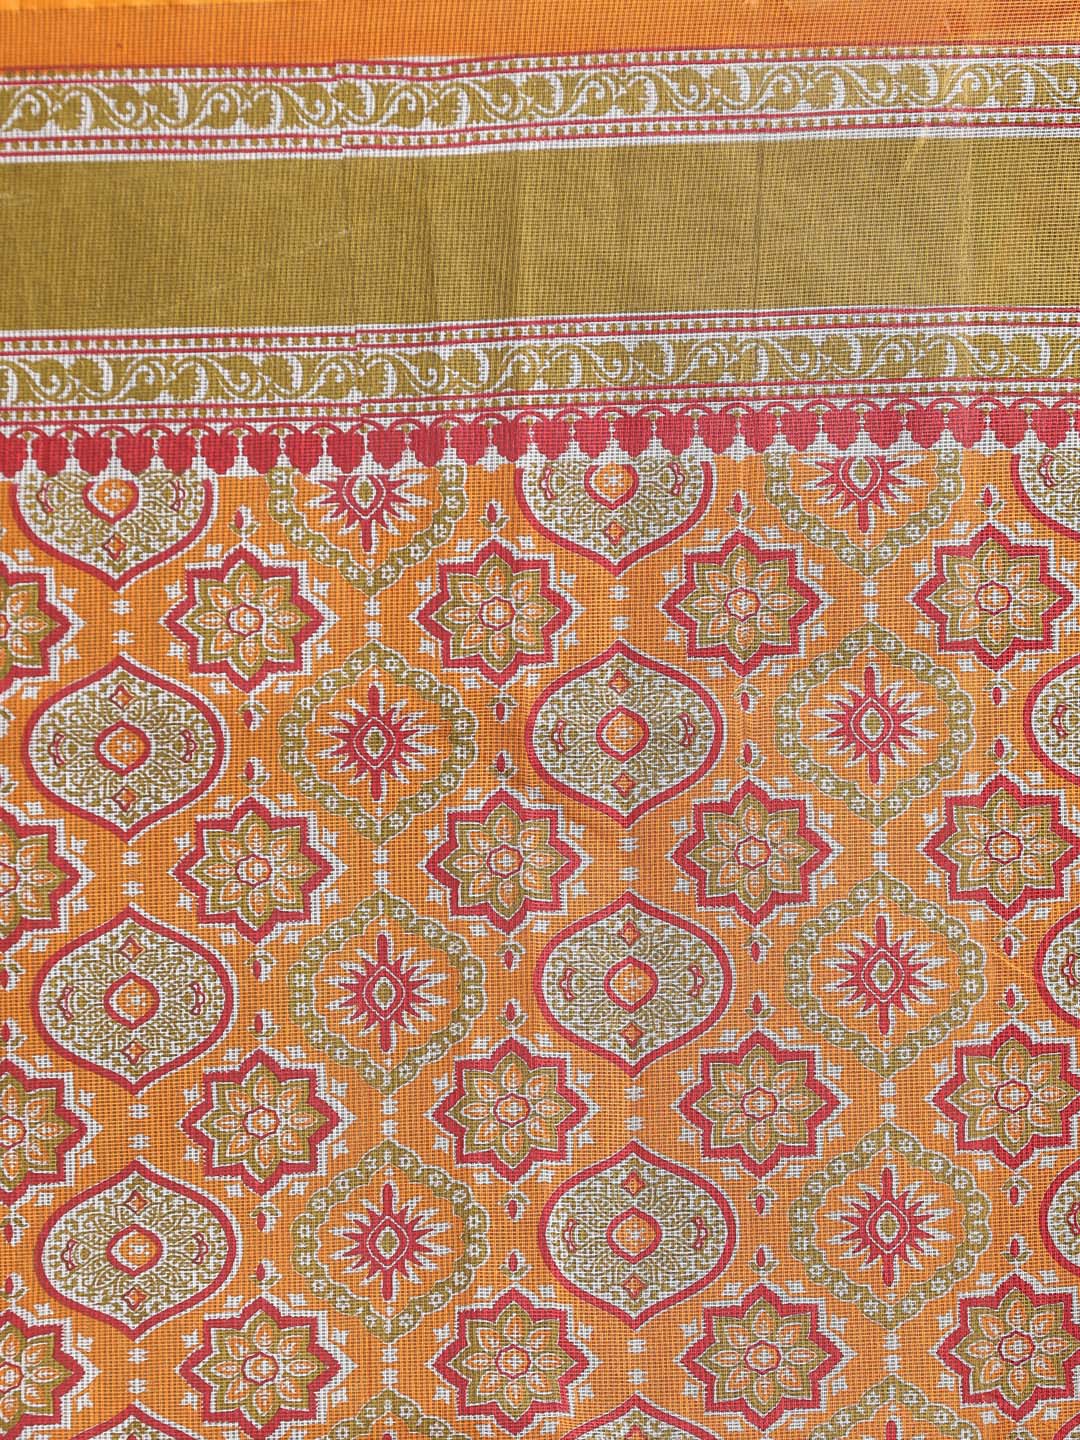 Indethnic Printed Super Net Saree in Yellow - Saree Detail View